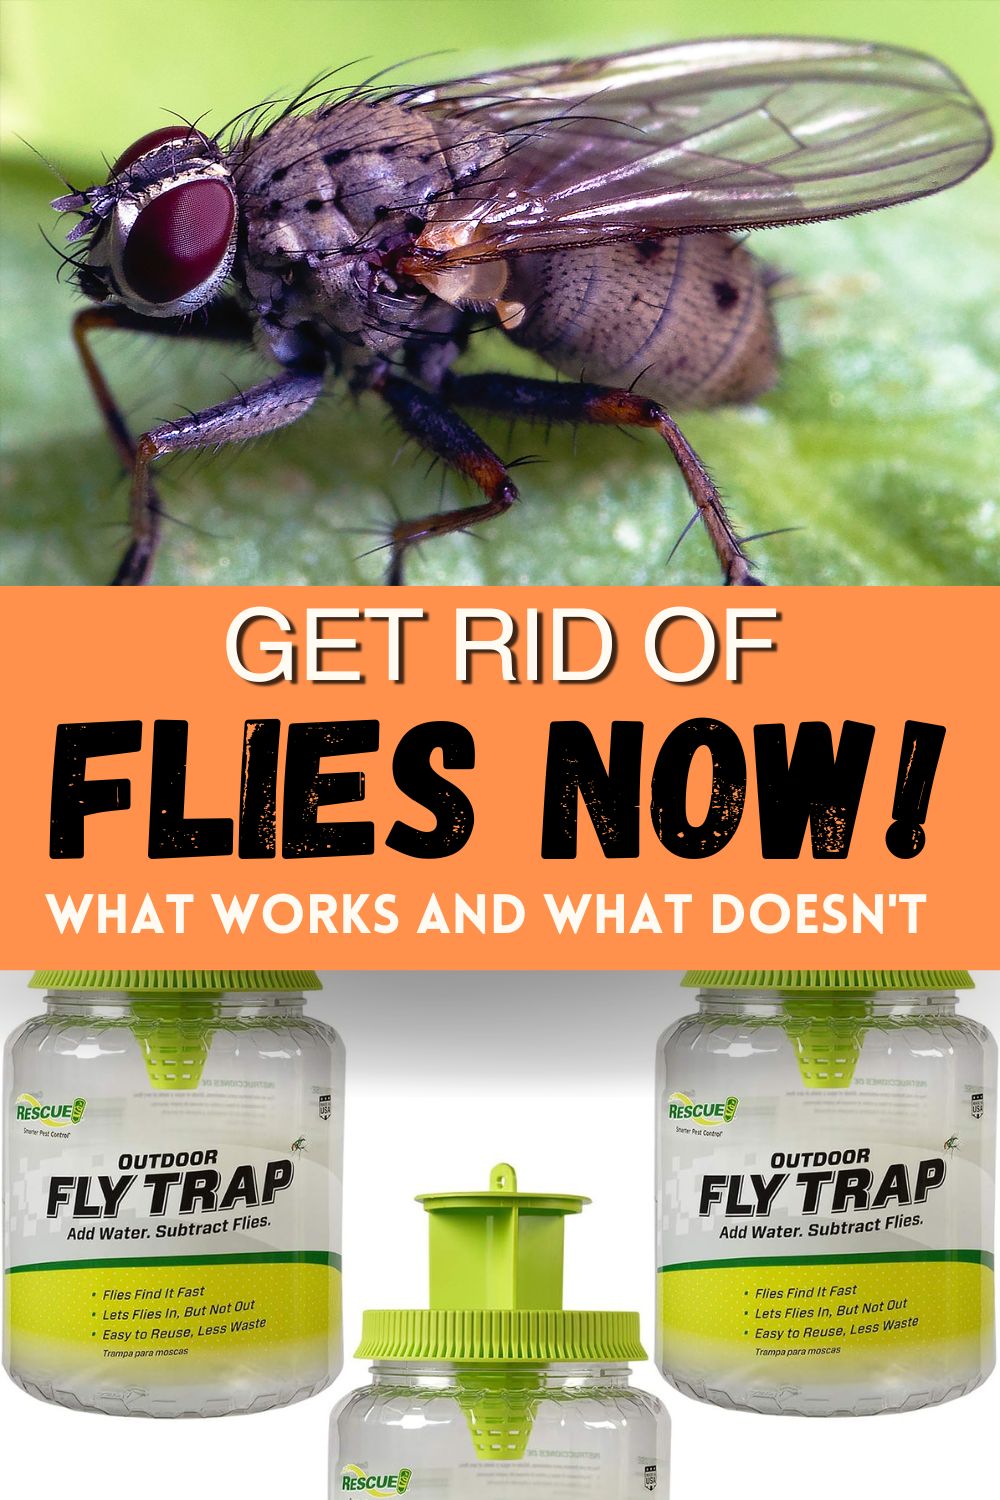 Get Rid of Flies NOW! Here’s What Really Works